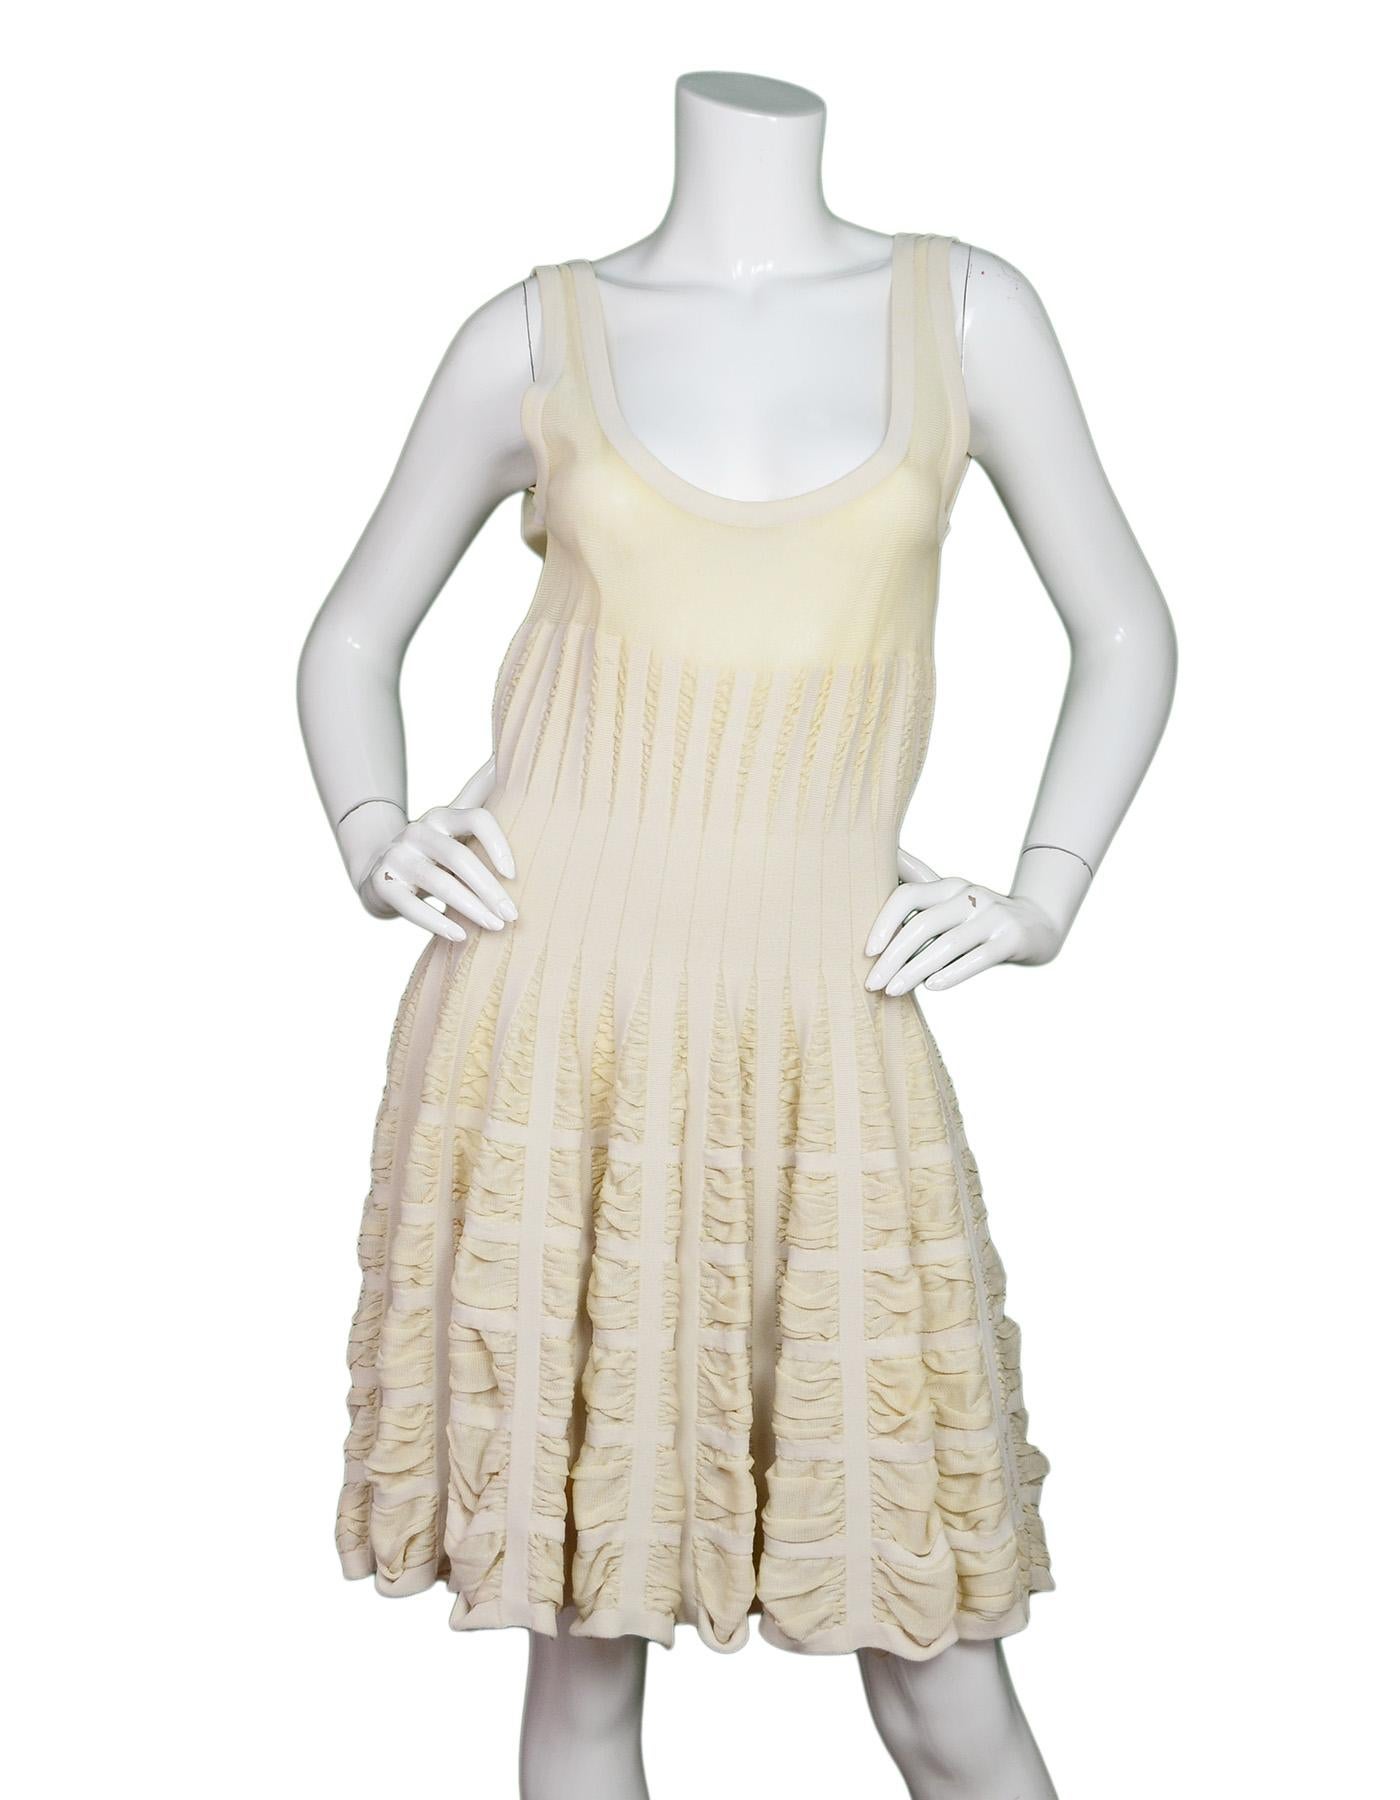 Alaia Cream Sleeveless Fit & Flare Dress Sz L

Made In: Italy
Color: Cream
Materials: 50% viscose, 40% silk, 10% polyester
Opening/Closure: Hidden back zipper
Overall Condition: Very good pre-owned condition with exception of some spoiling on straps